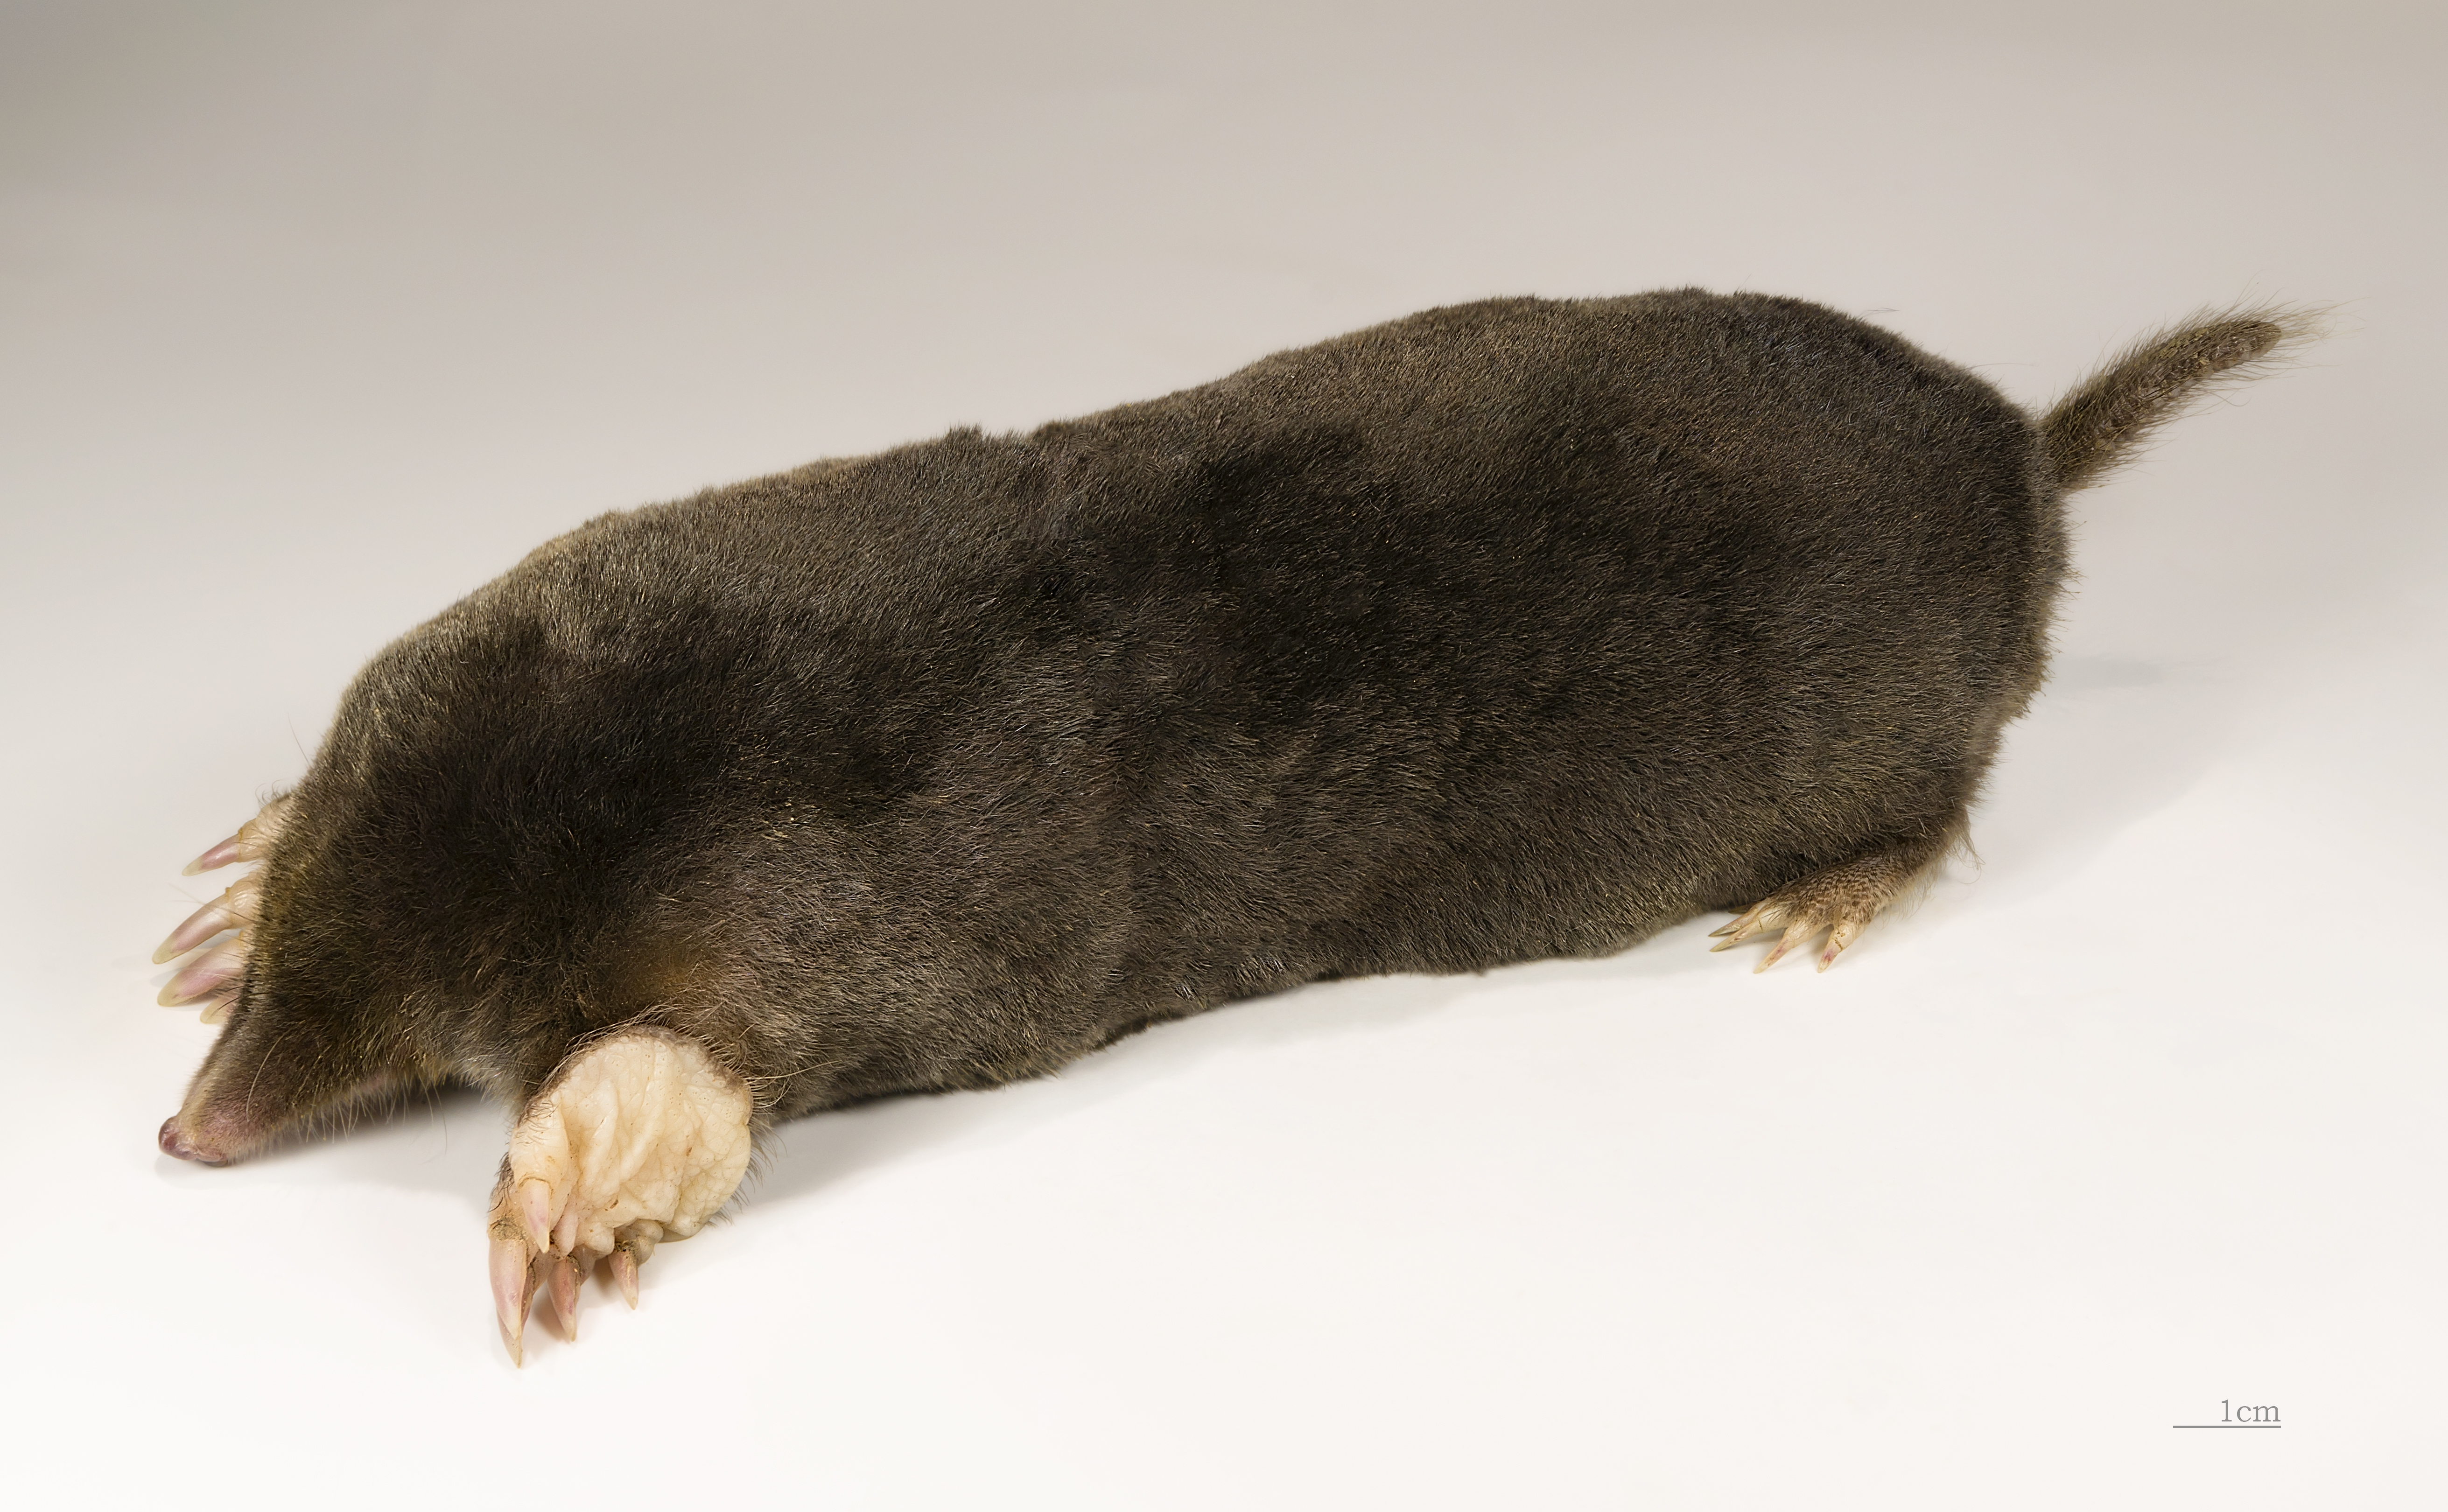 What is another name for the European mole?